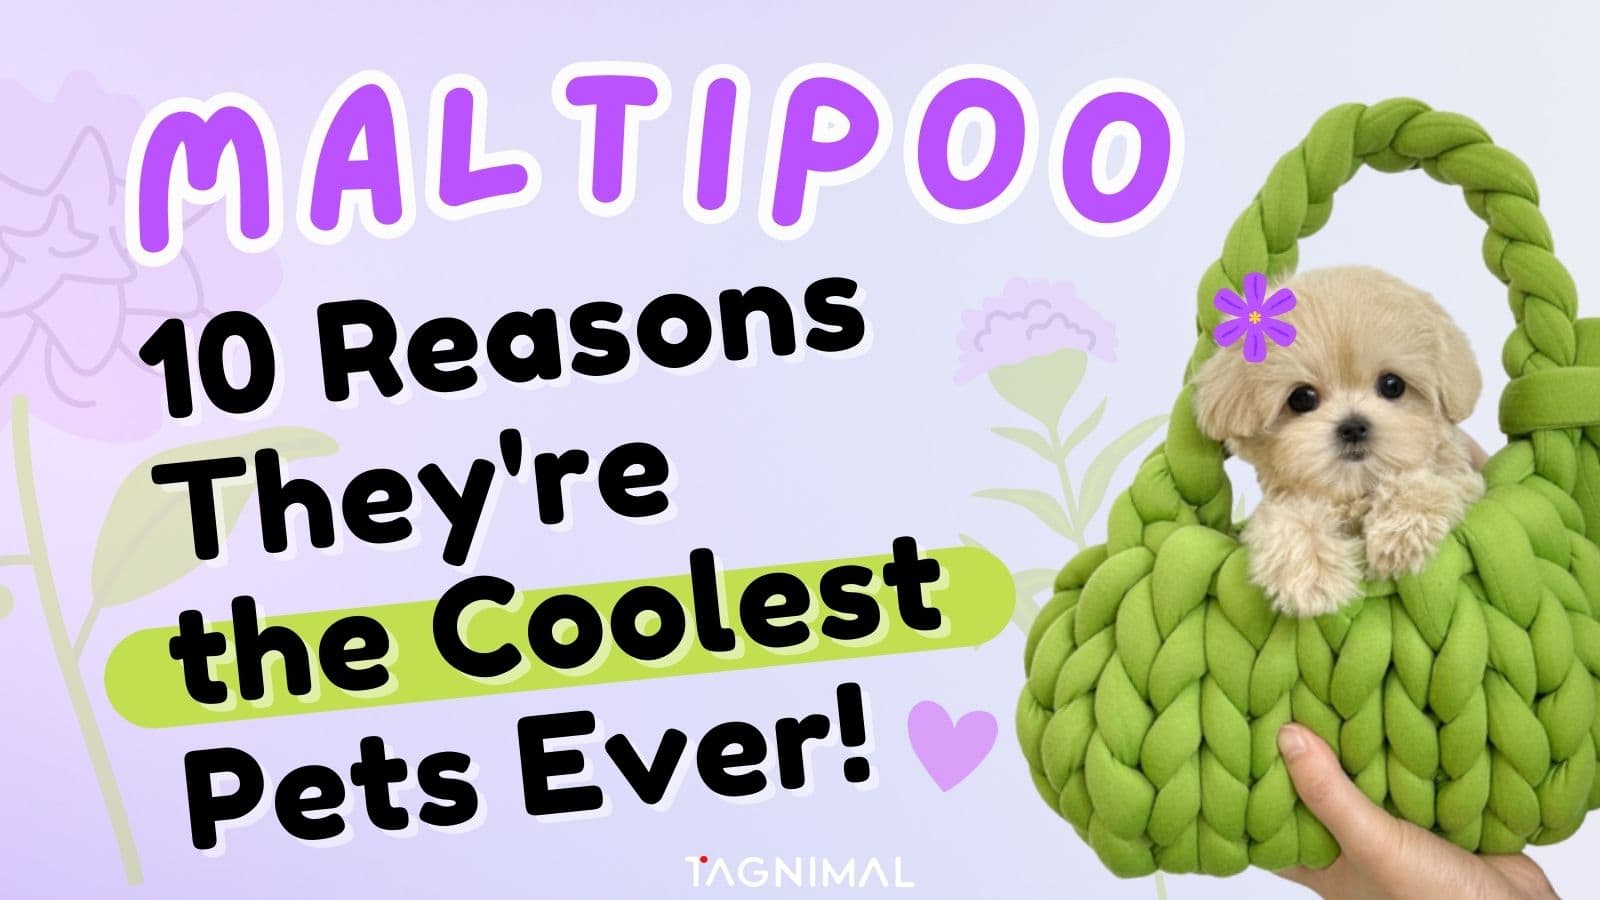 Maltipoo 10 Reasons They Are the Coolest Pets Ever Tagnimal Blog Cover